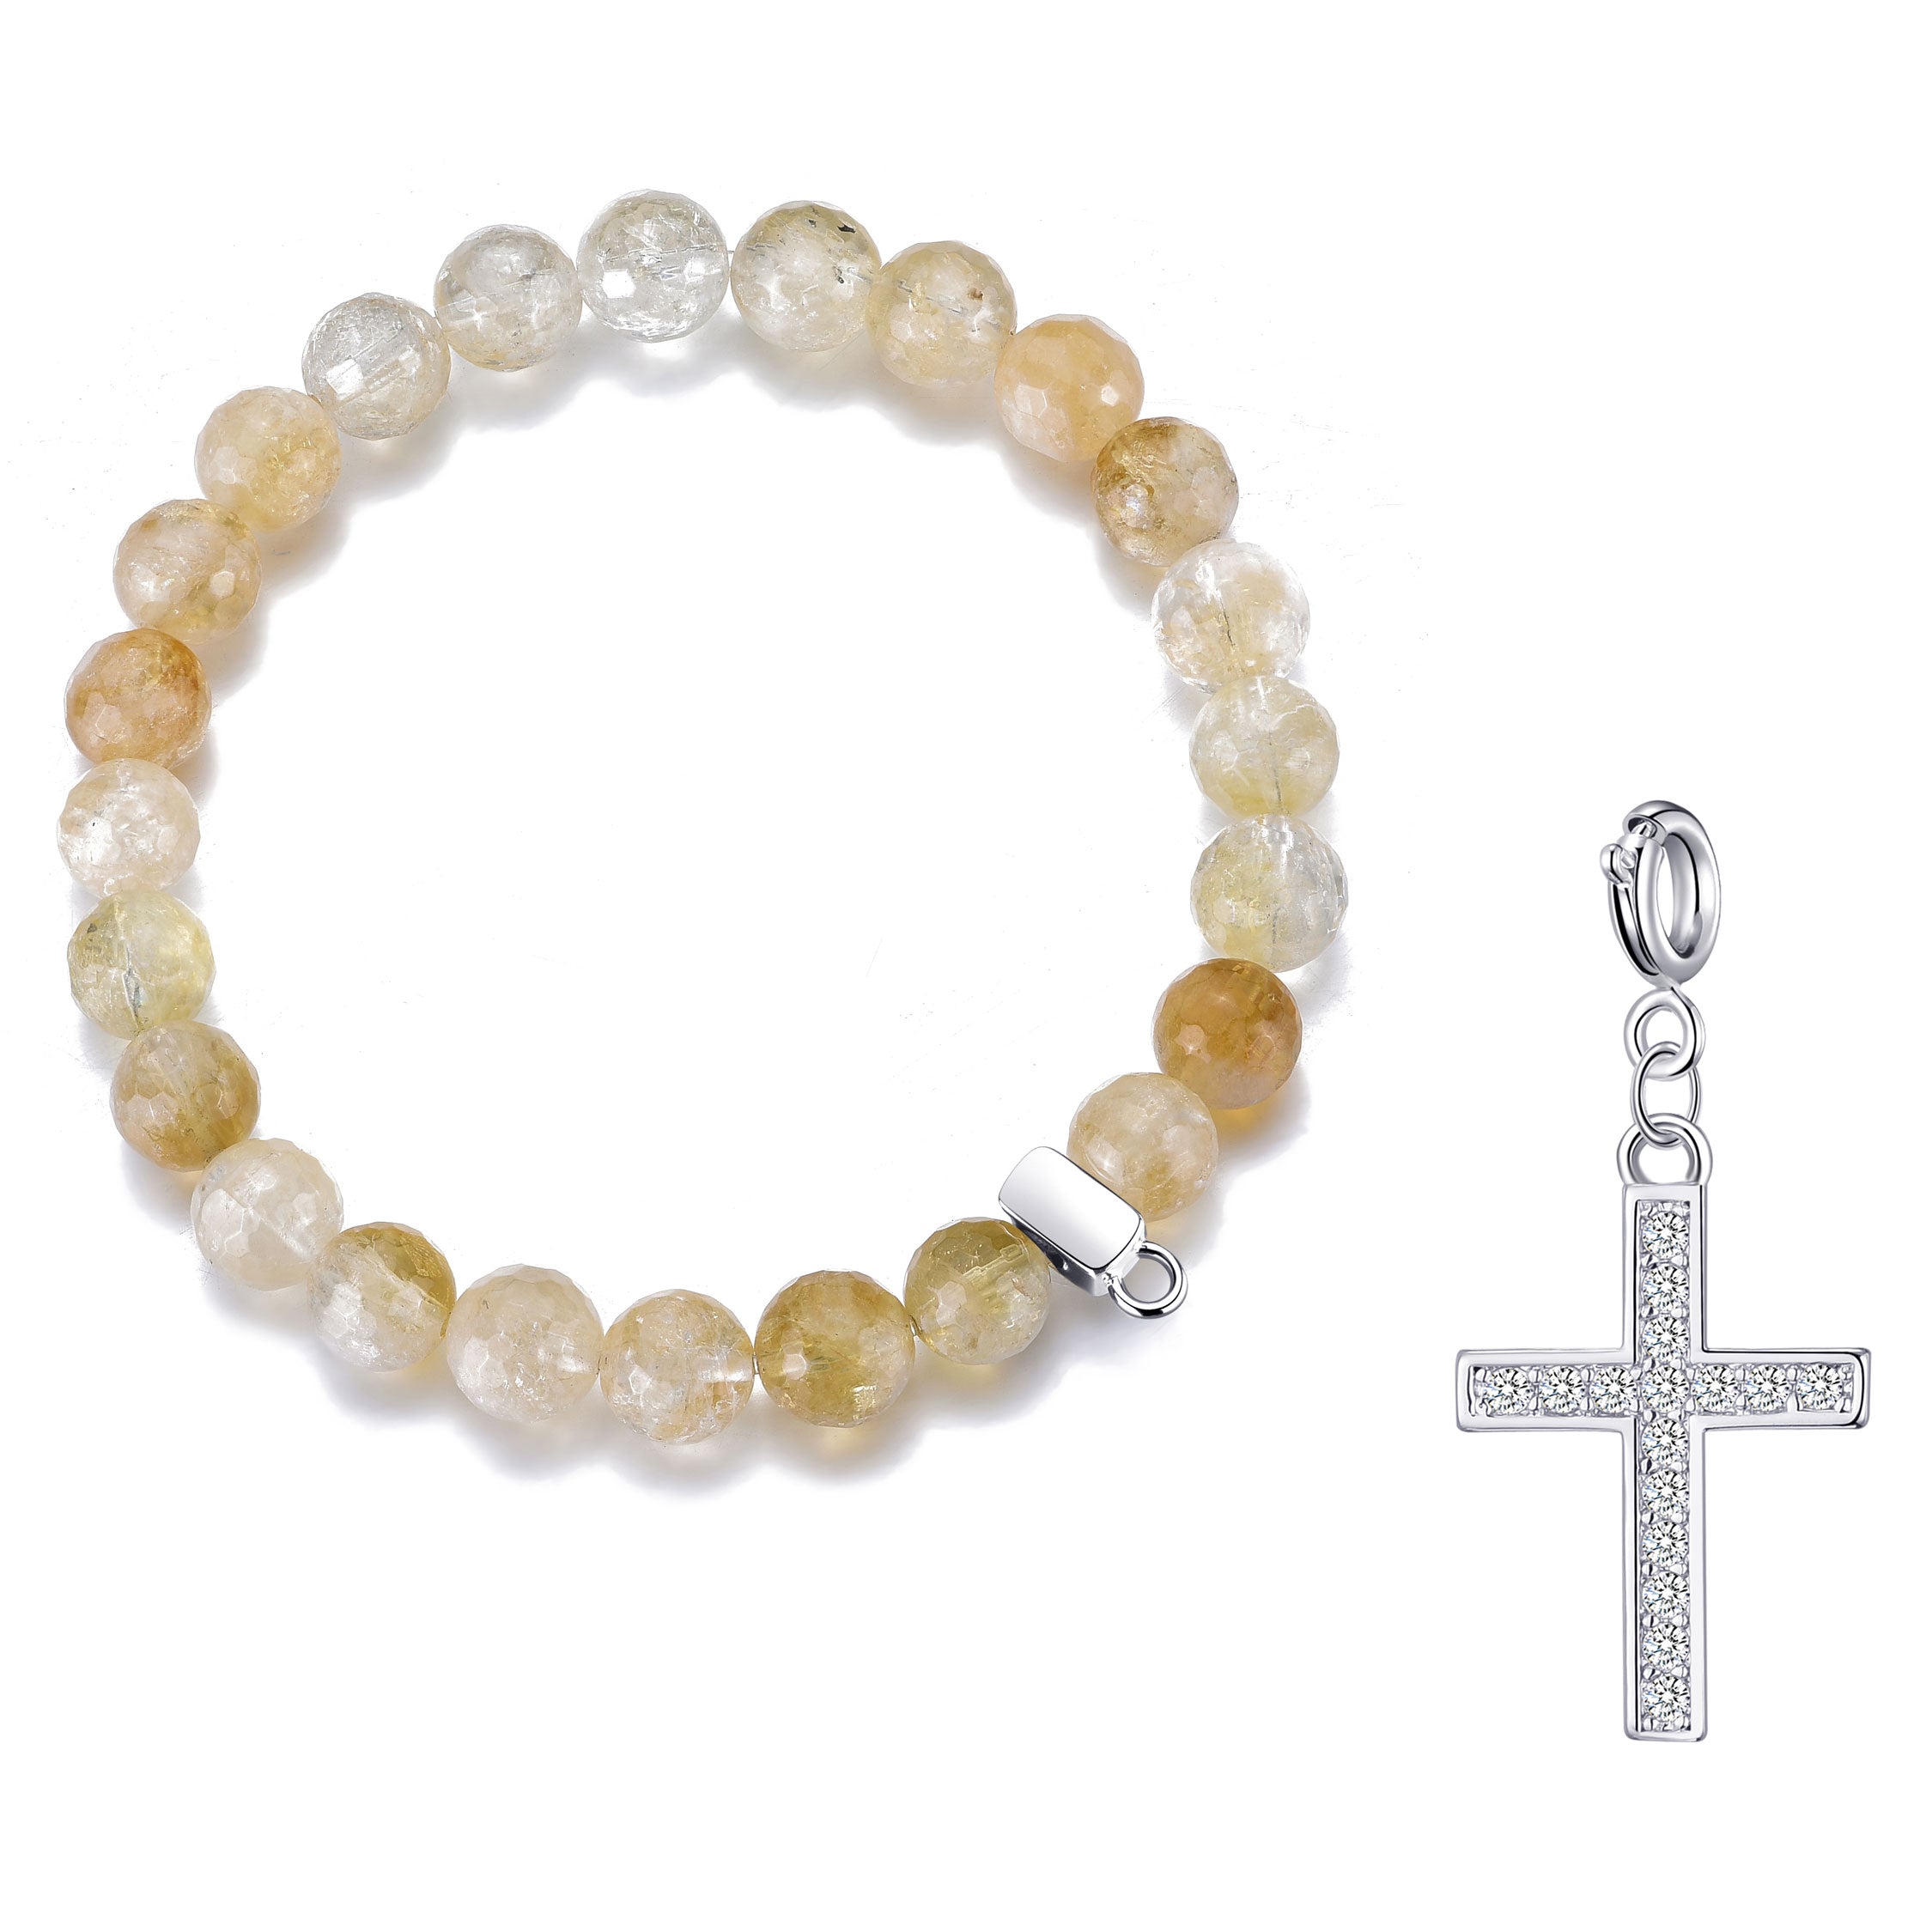 Faceted Yellow Quartz Gemstone Bracelet with Charm Created with Zircondia® Crystals